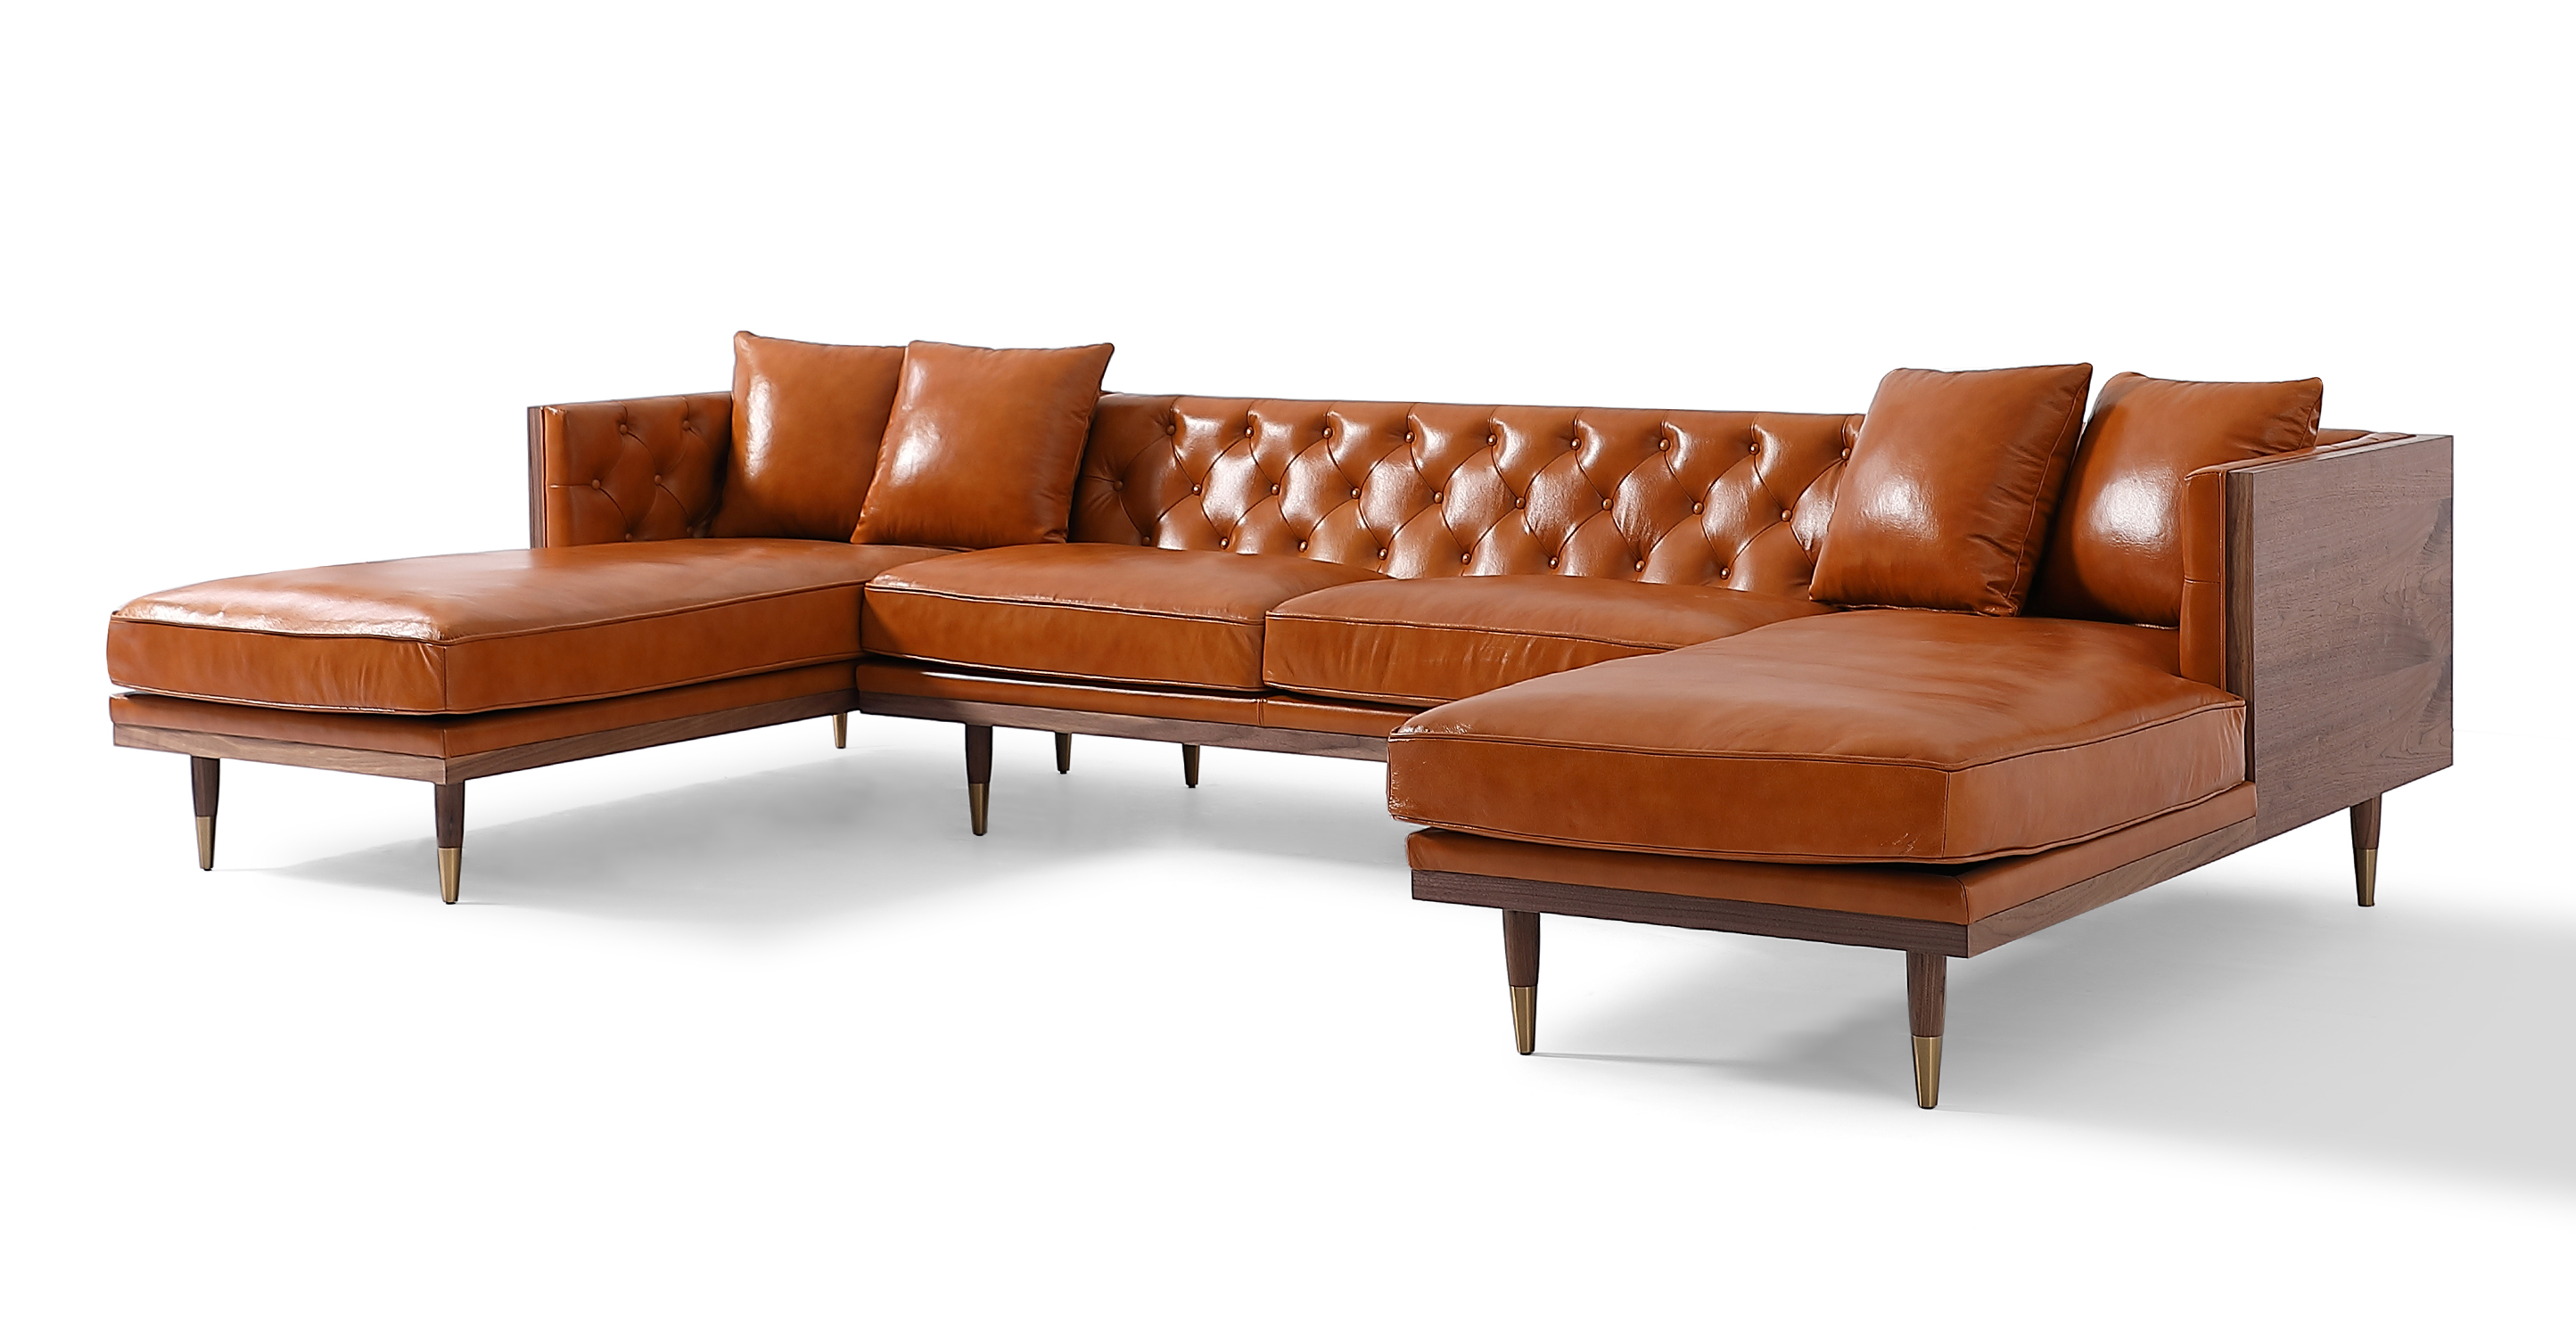 WoodNeoU Shaped Sectional in Tan leather has a walnut wood wrapped exterior. The sectional consists of one right chaise, one armless center love seat, and one left chaise piece. The exterior top of the arms and back are all walnut wood rectangles, creating a box shape. The interior of the sectional backs and arms are affixed and tufted cushions. The four seat cushions are smooth and removable. The legs are matching walnut wood, tapered, and brass tipped. The upholstery is tan in color. 